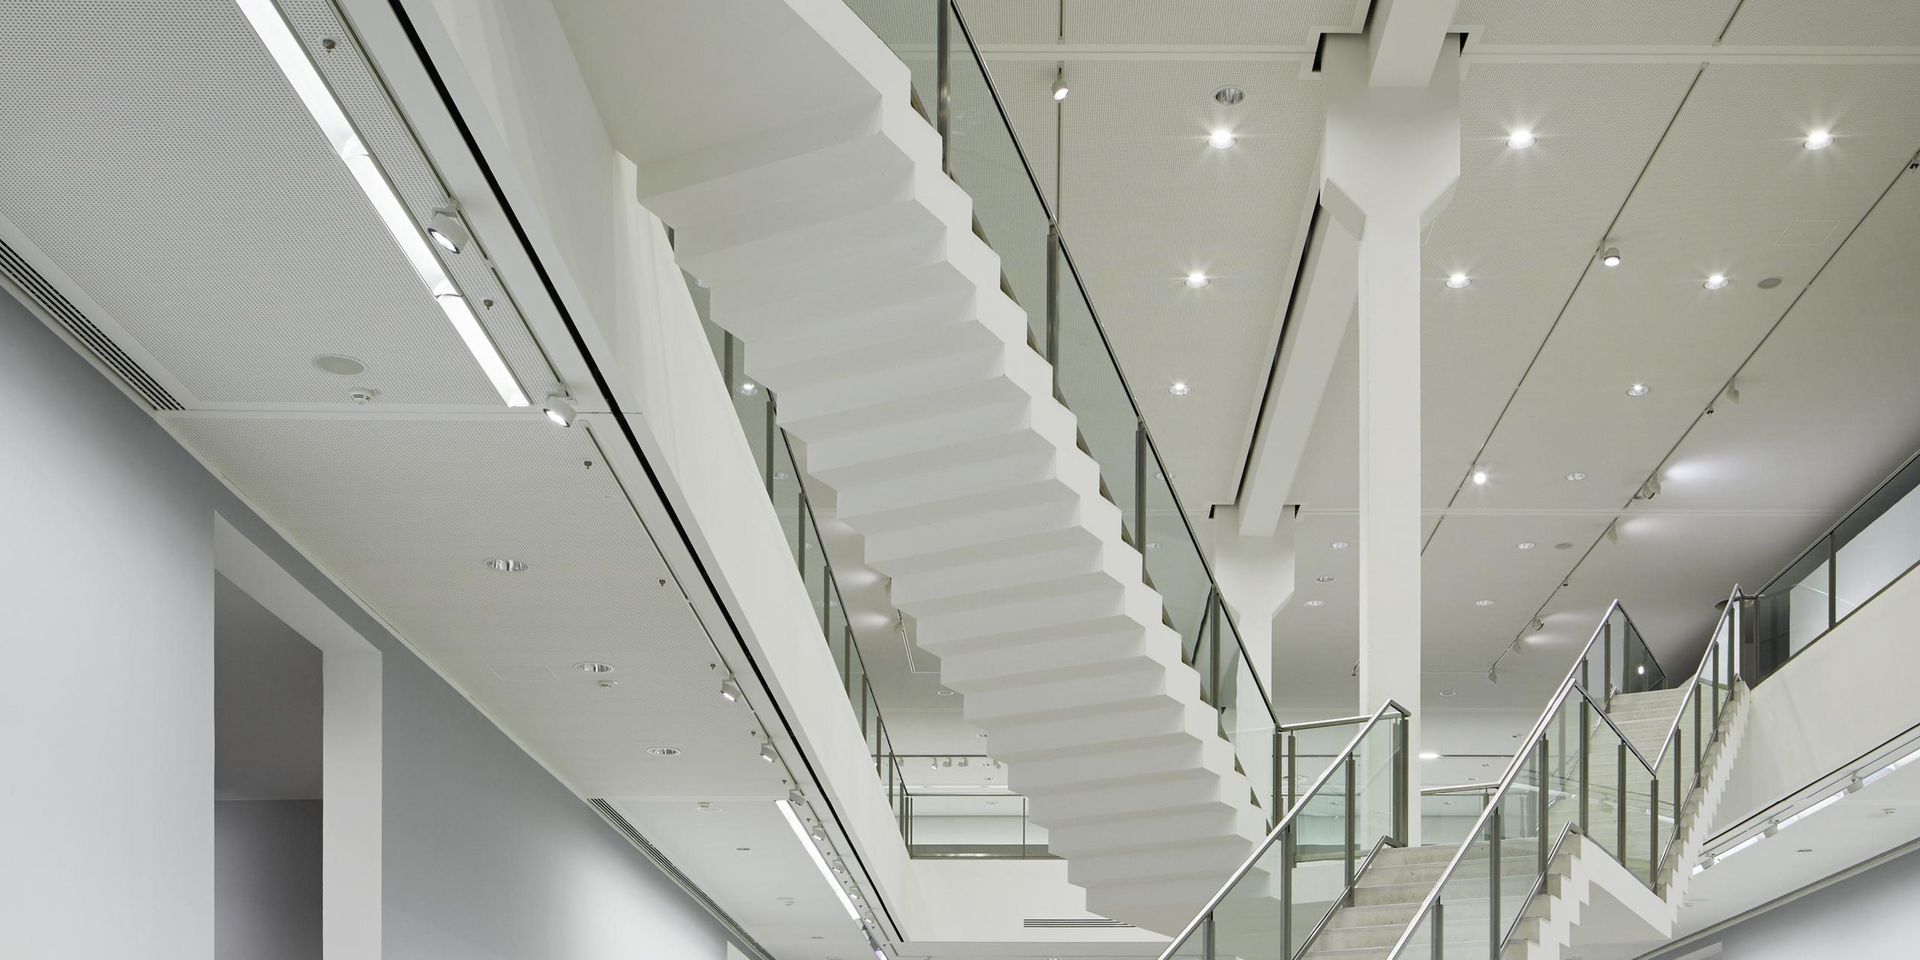 Photo: Two-storey exhibition space with artworks on the walls, two intersecting staircases in the middle.